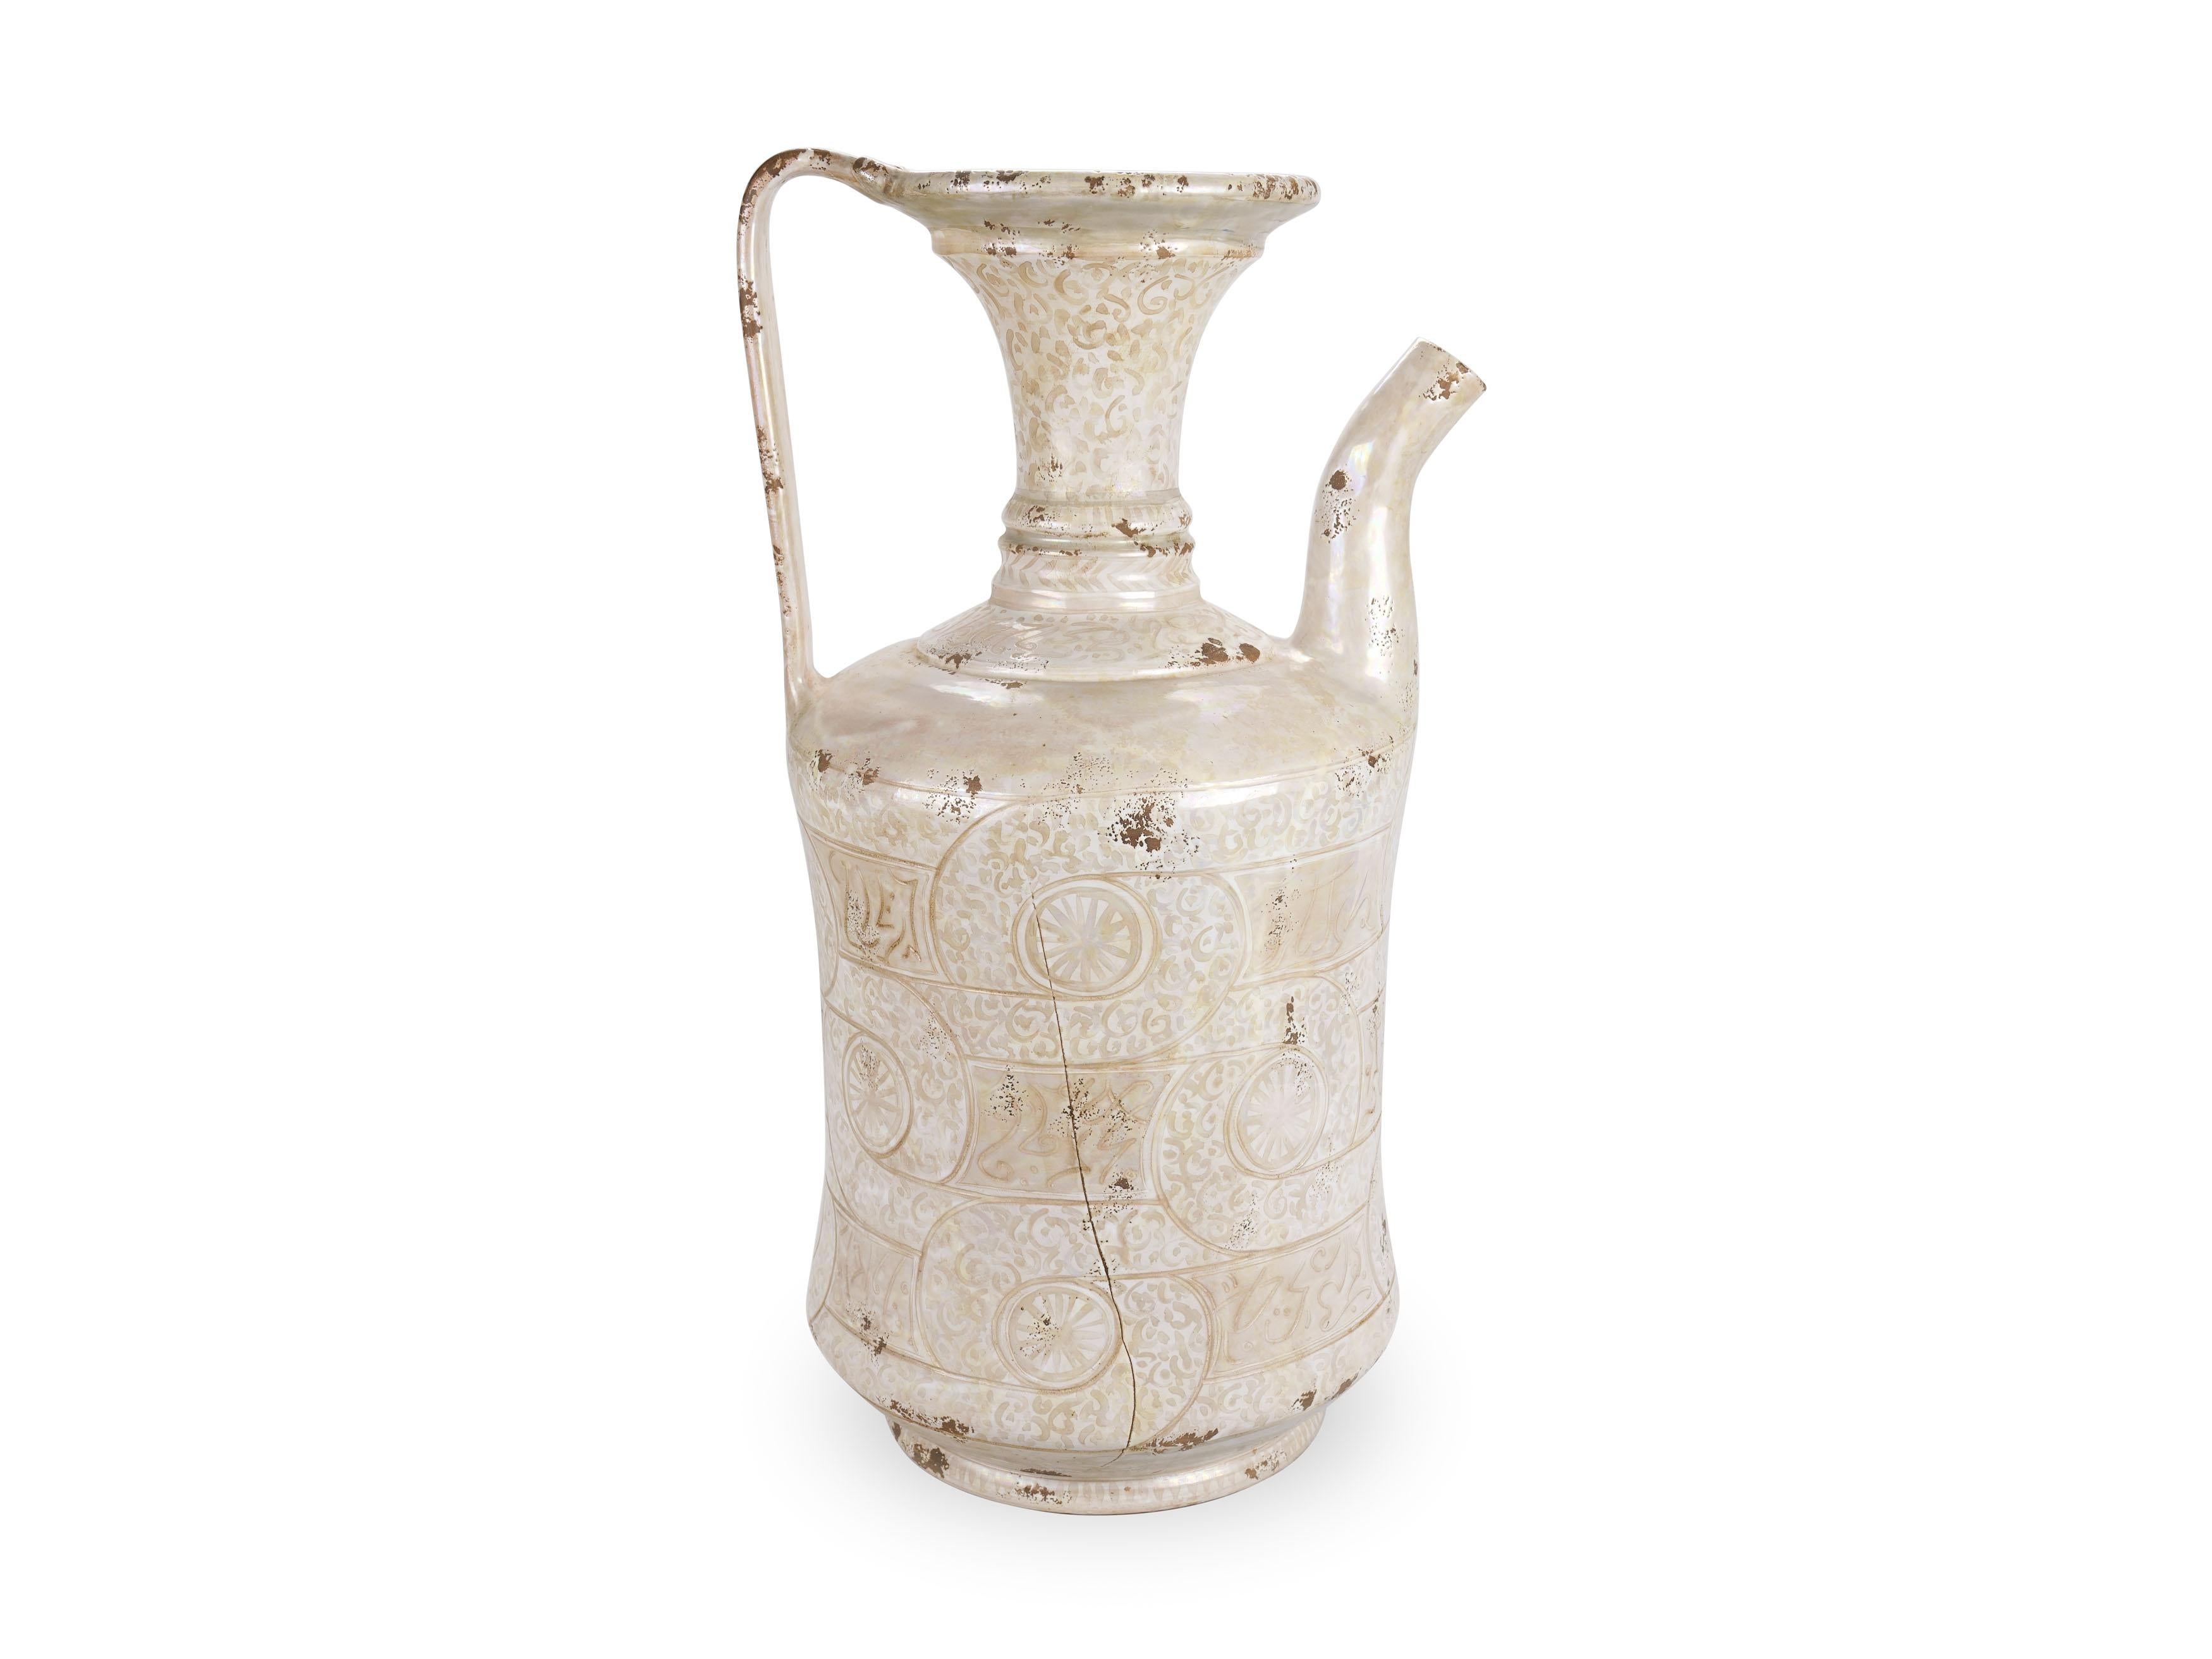 Magnificent large decorative ewer, handmade and hand-painted in Italy by the artist G. Mengoni for deBlona. His creativity was inspired by Middle Eastern ceramic tradition, whose ornamental features the artist wisely combined with